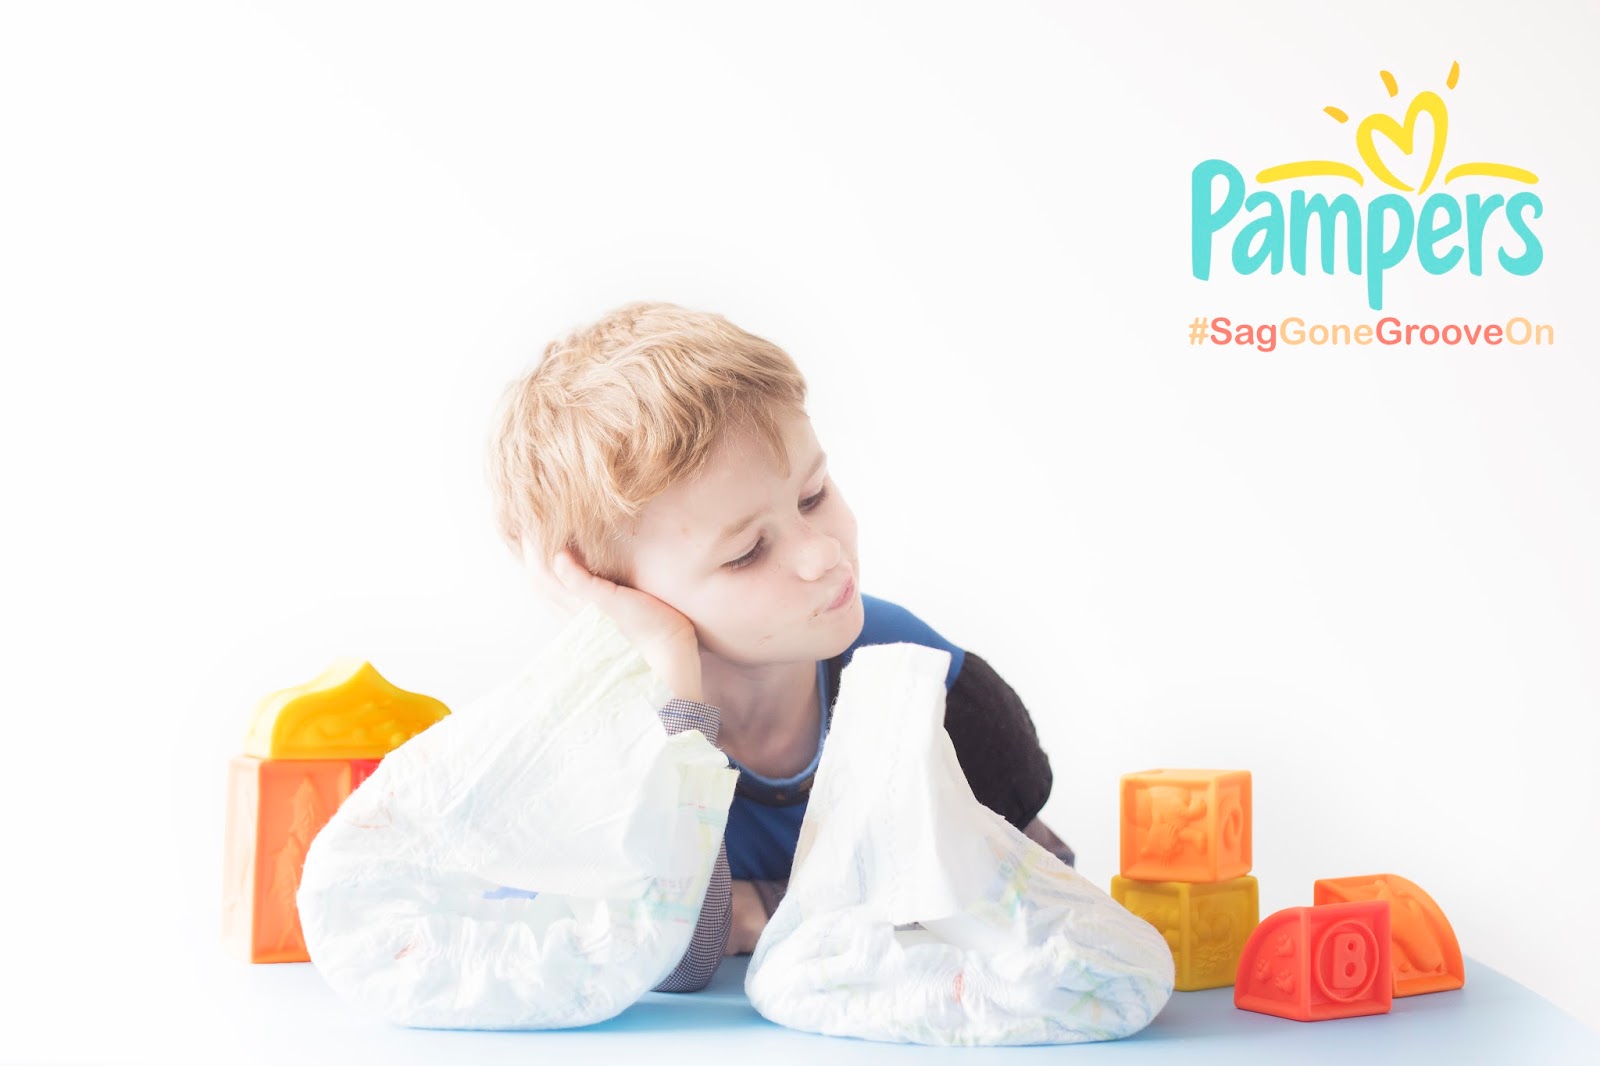 FAREWELL, SAGGY PANTS: #SAGGONEGROOVEON [HERO VS. PAMPERS ACTIVE FIT] #AD